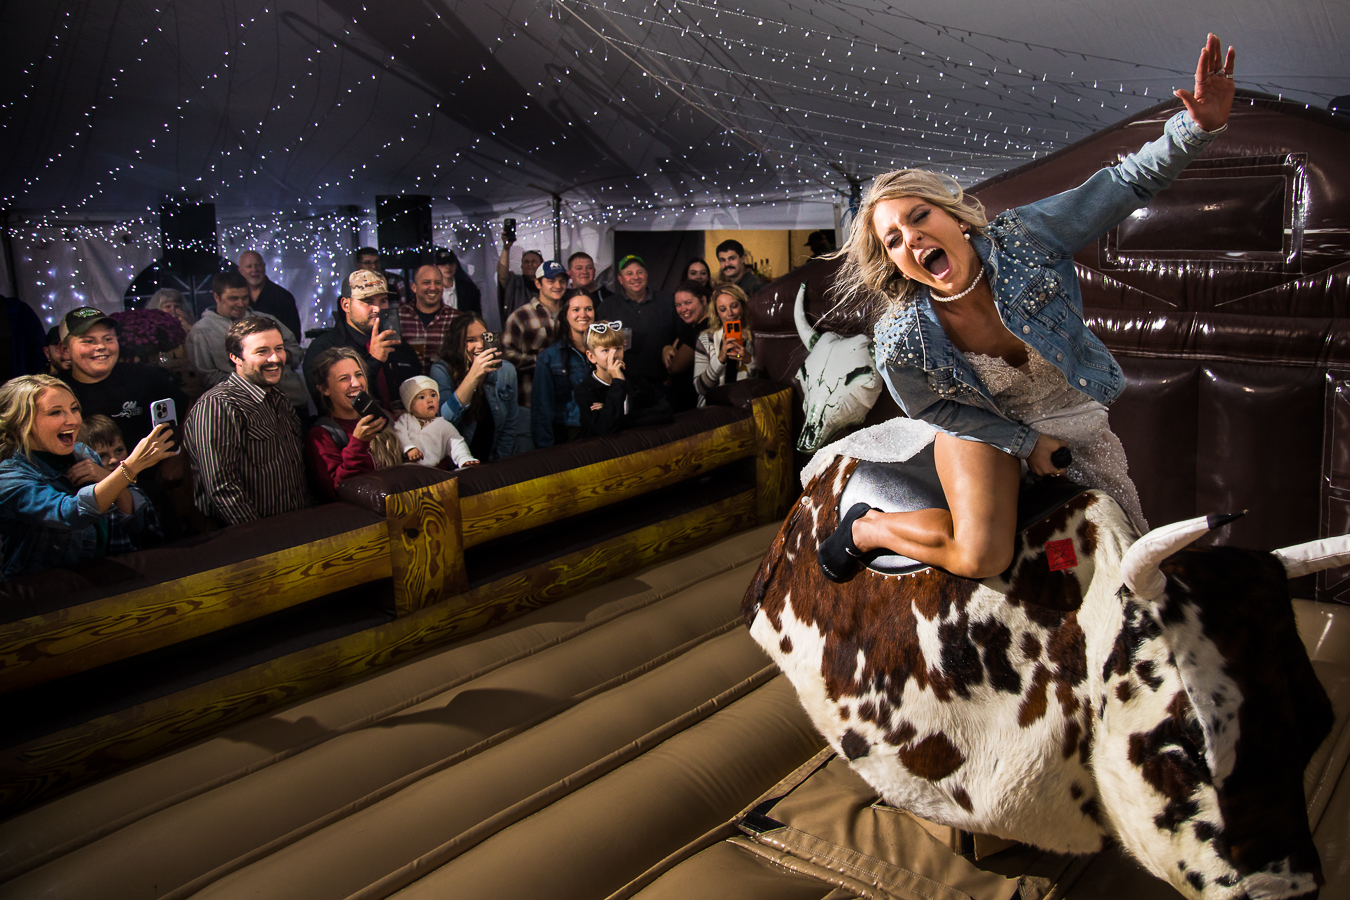 best pa country wedding photographer, lisa rhinehart, captures this candid, fun, unique and creative image of the bride and she is riding the mechanical bull during her wild country wedding reception in halifax pa 